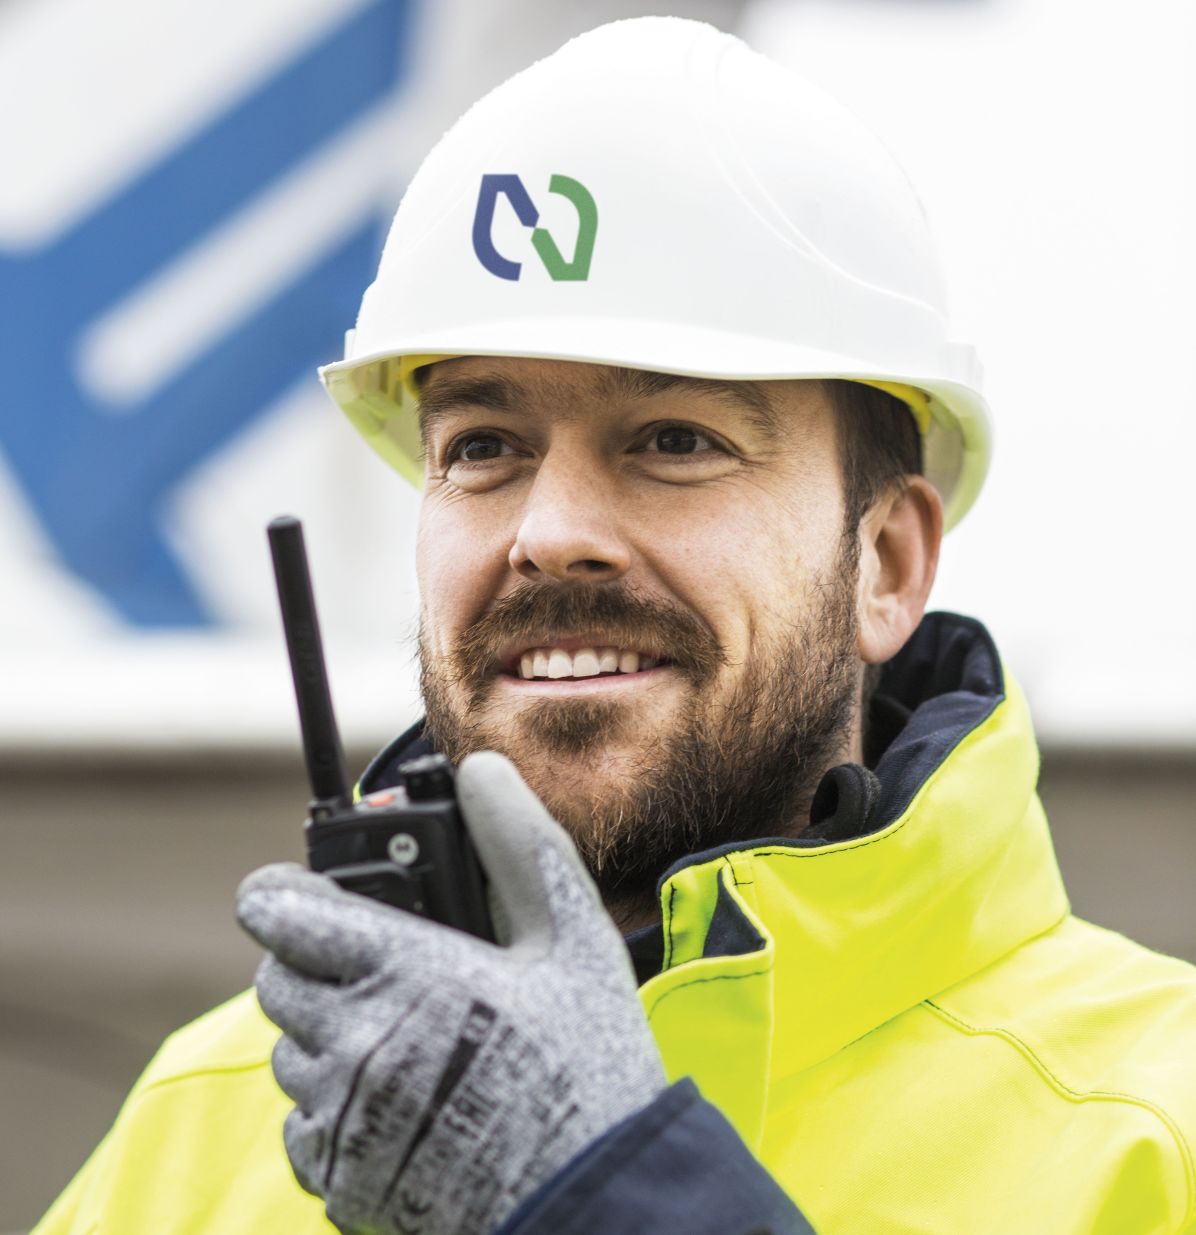 Man on pipeline operation with walkie talkie